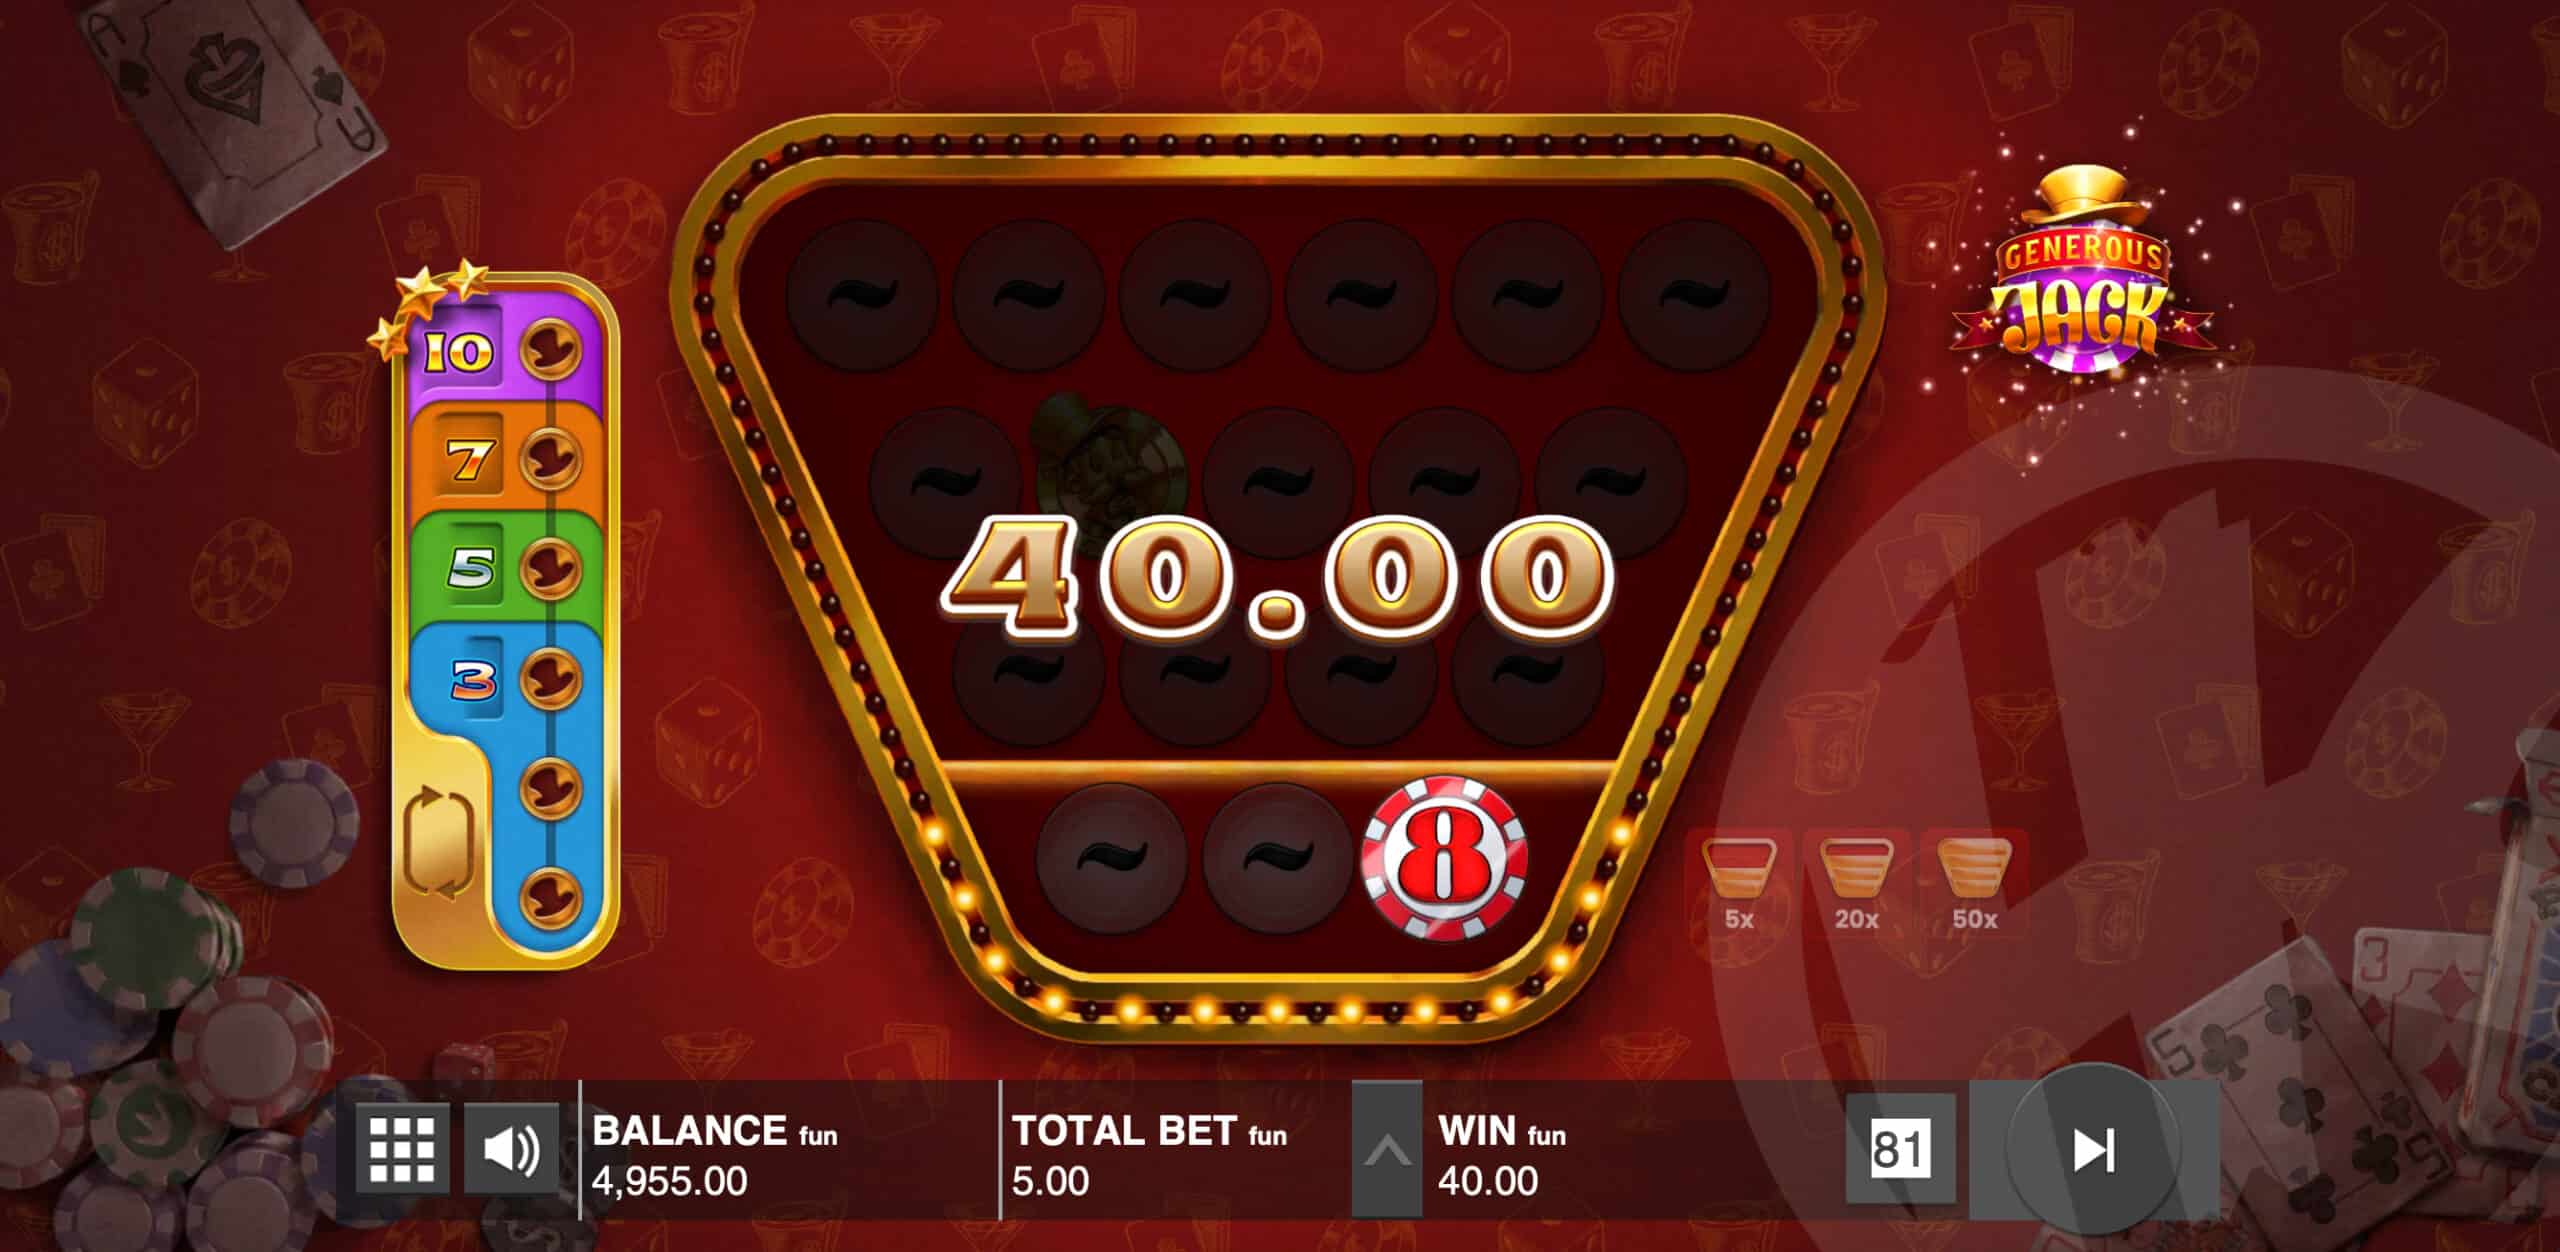 Win What You See With Bet Multiplier Chips